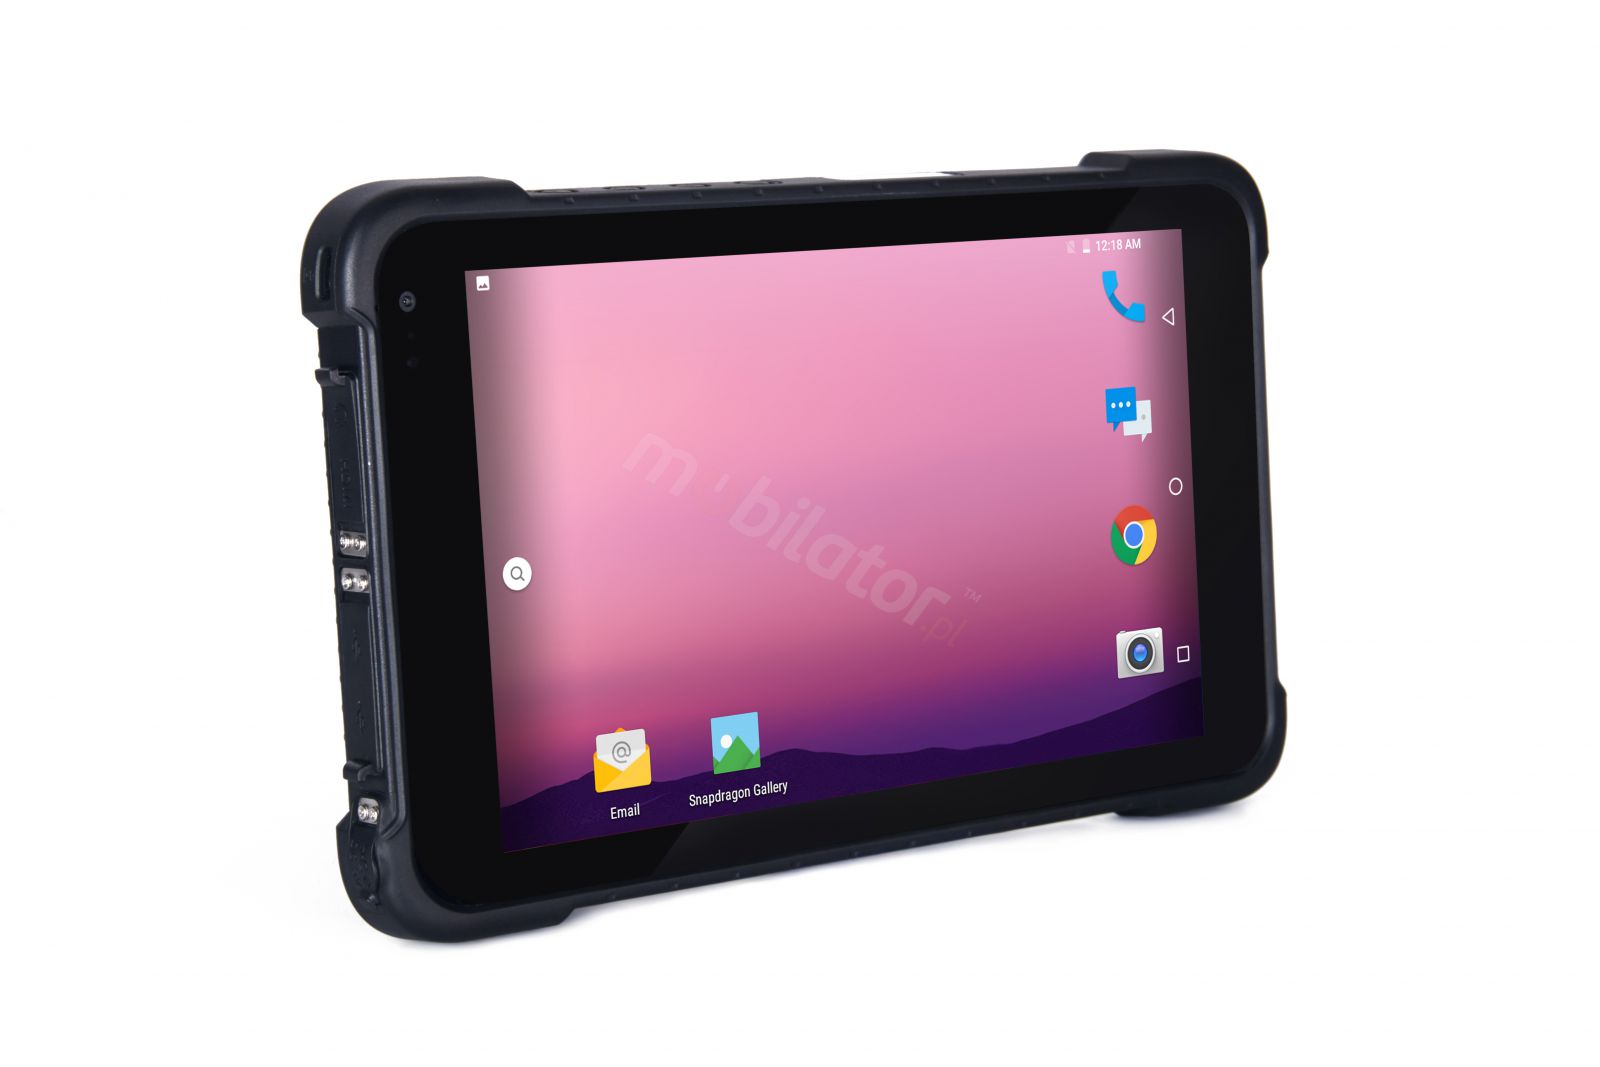 Rugged tablet with an octa-core processor, 4GB RAM memory, 64GB disk, NFC, 800nits screen - Emdoor Q86 v.2 